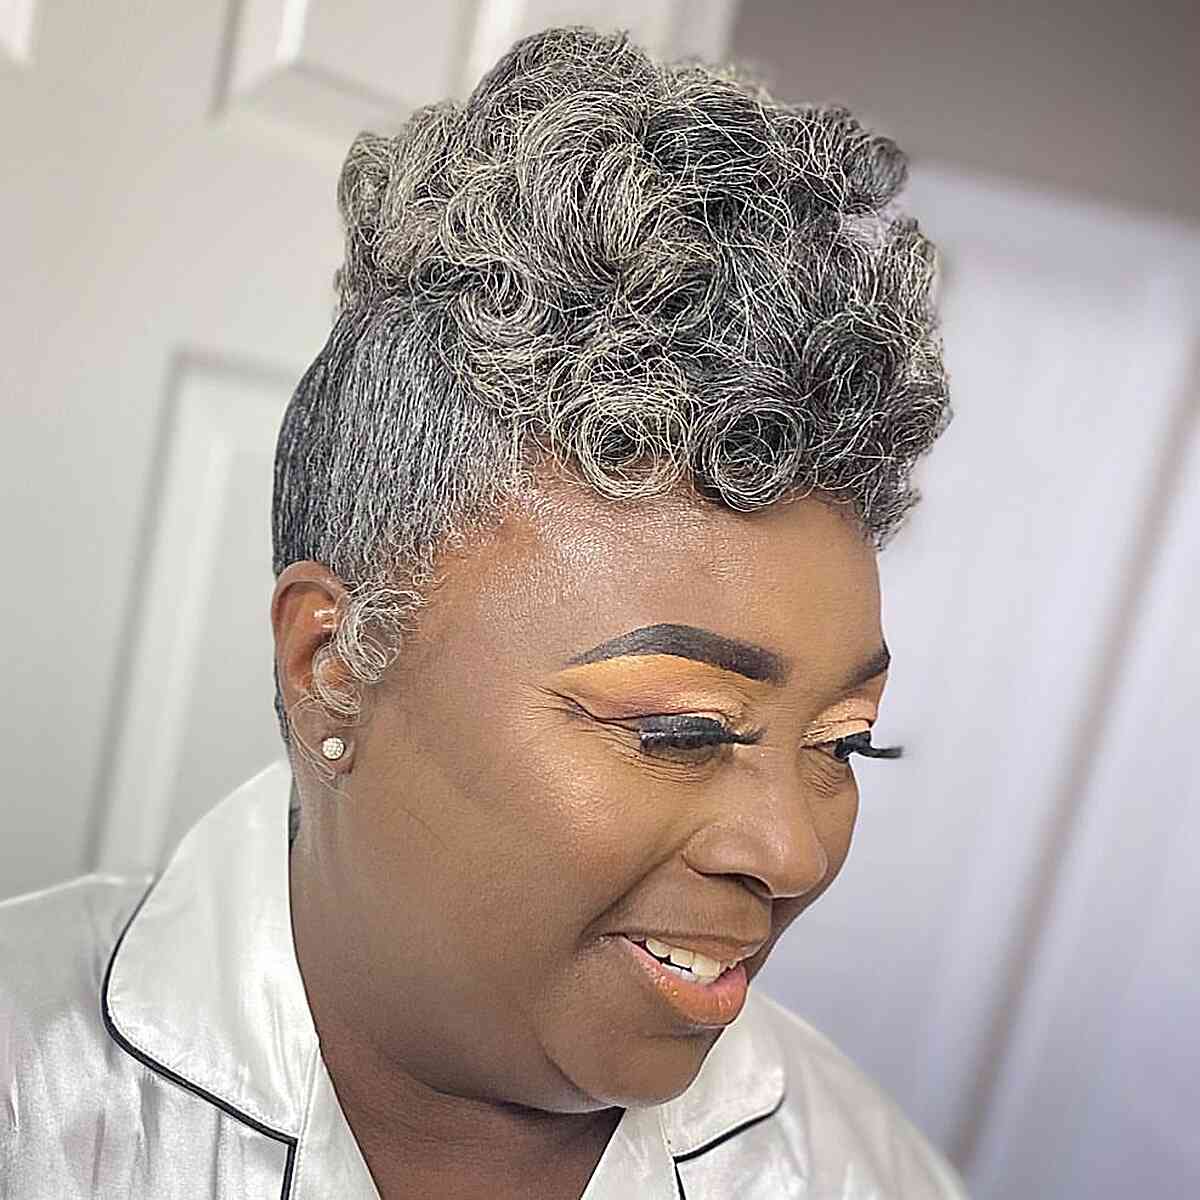 Short Pixie Cut and Curly Top Sew-In Weave